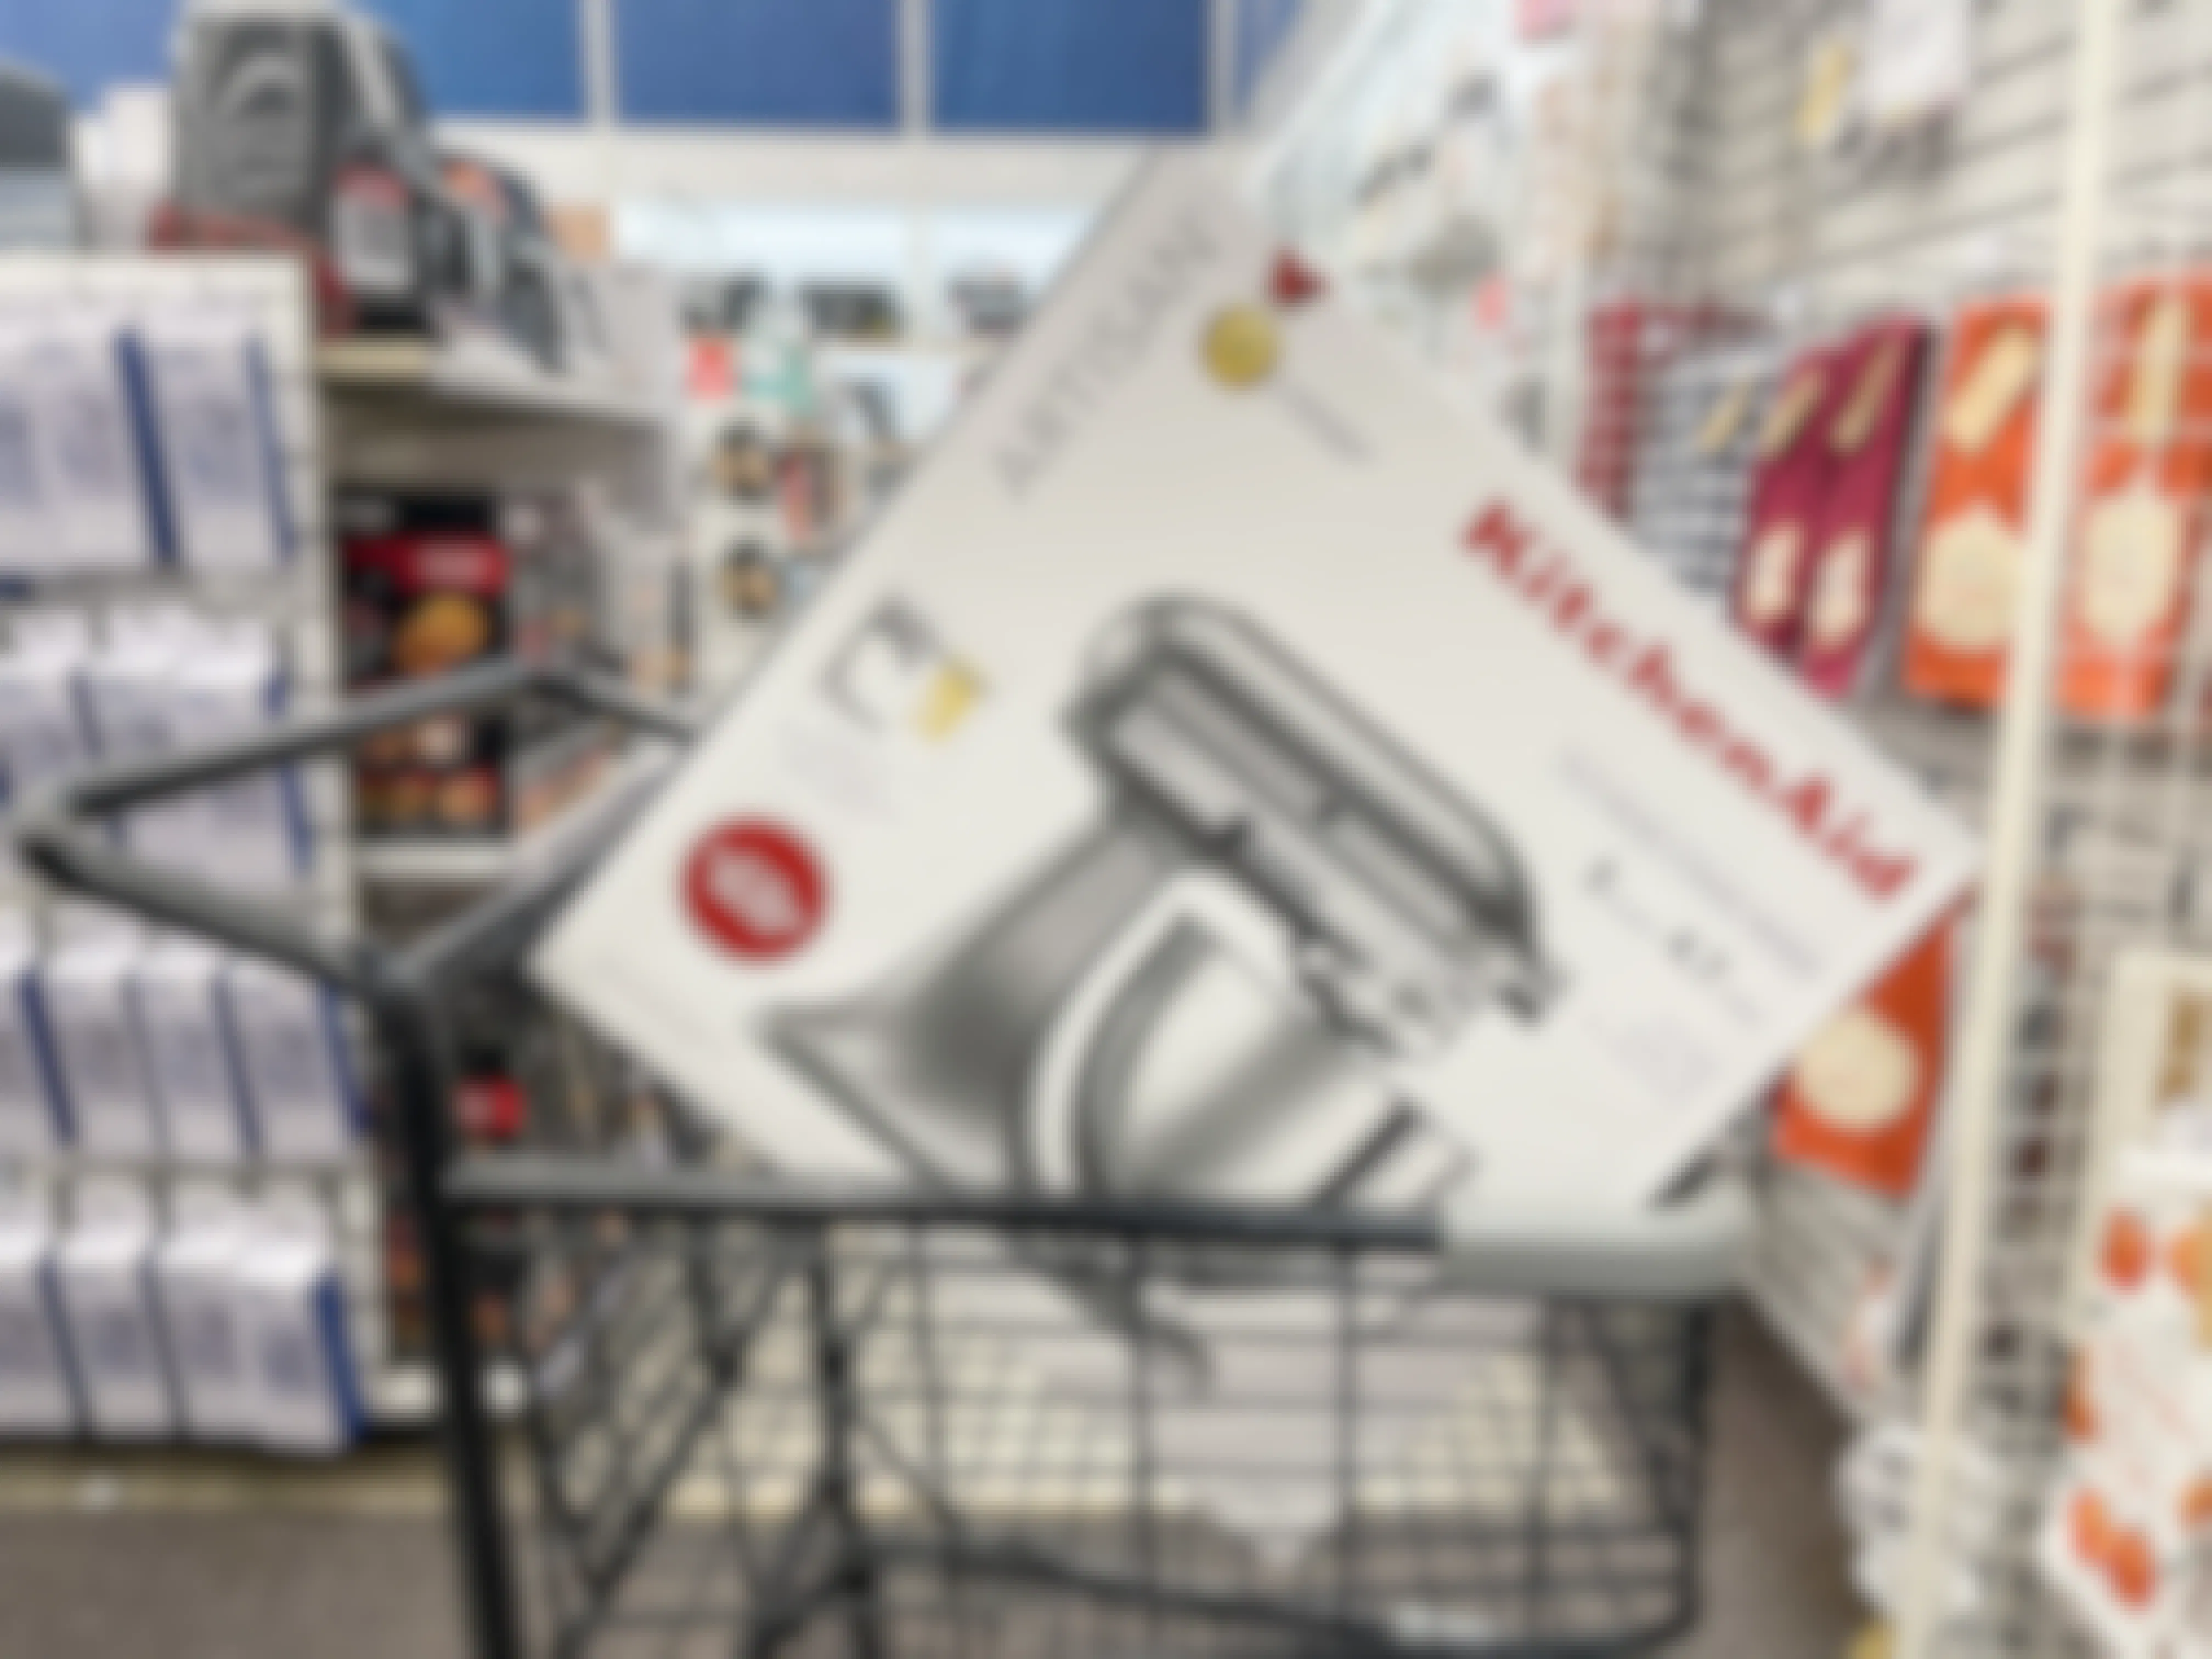 A Kitchenaid Artisan mixer sitting in a shopping cart with other kitchen products in the background